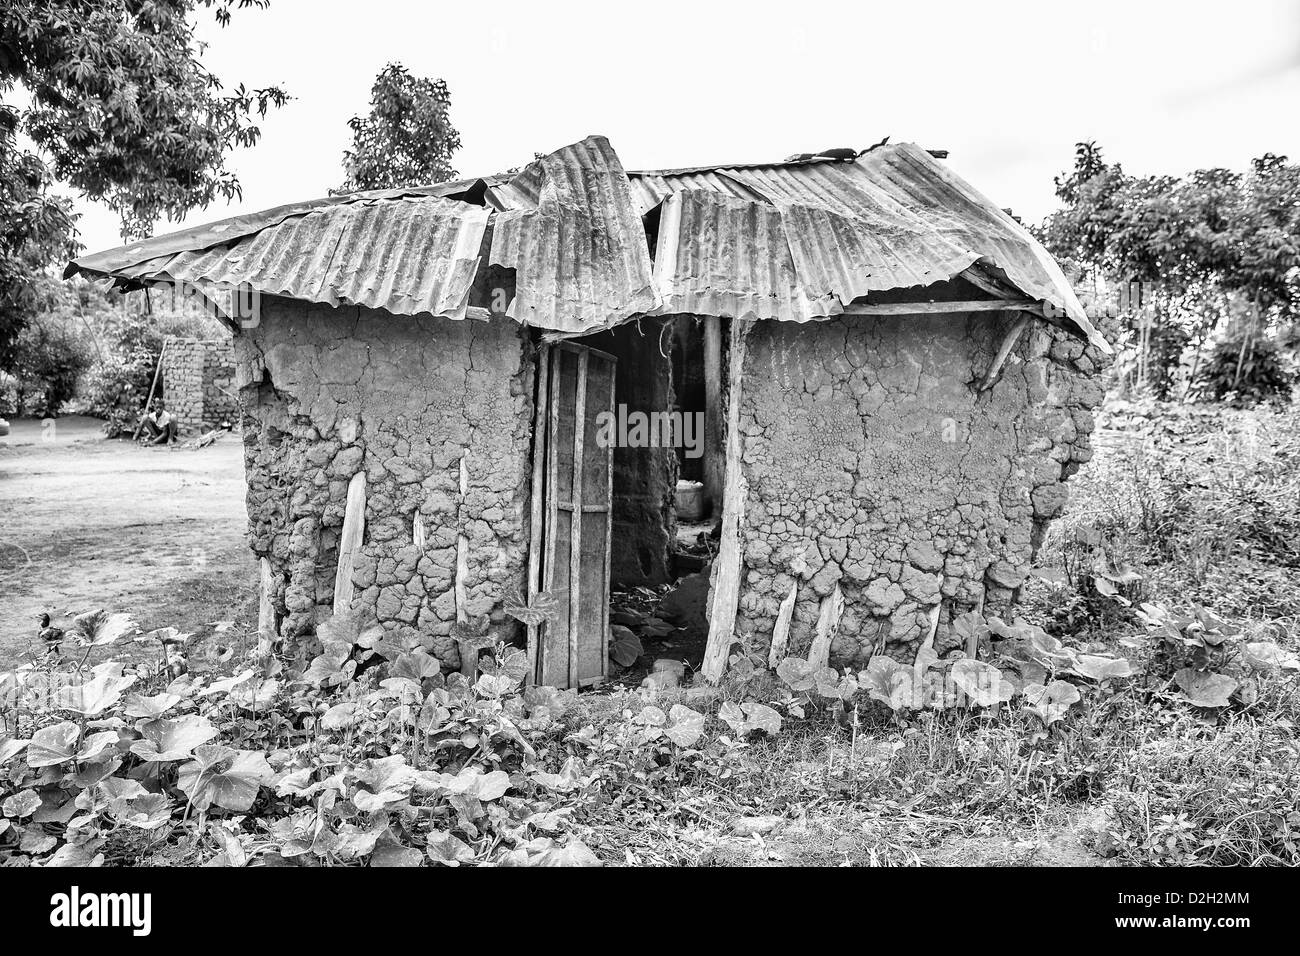 A dilapidated building in an African village Stock Photo